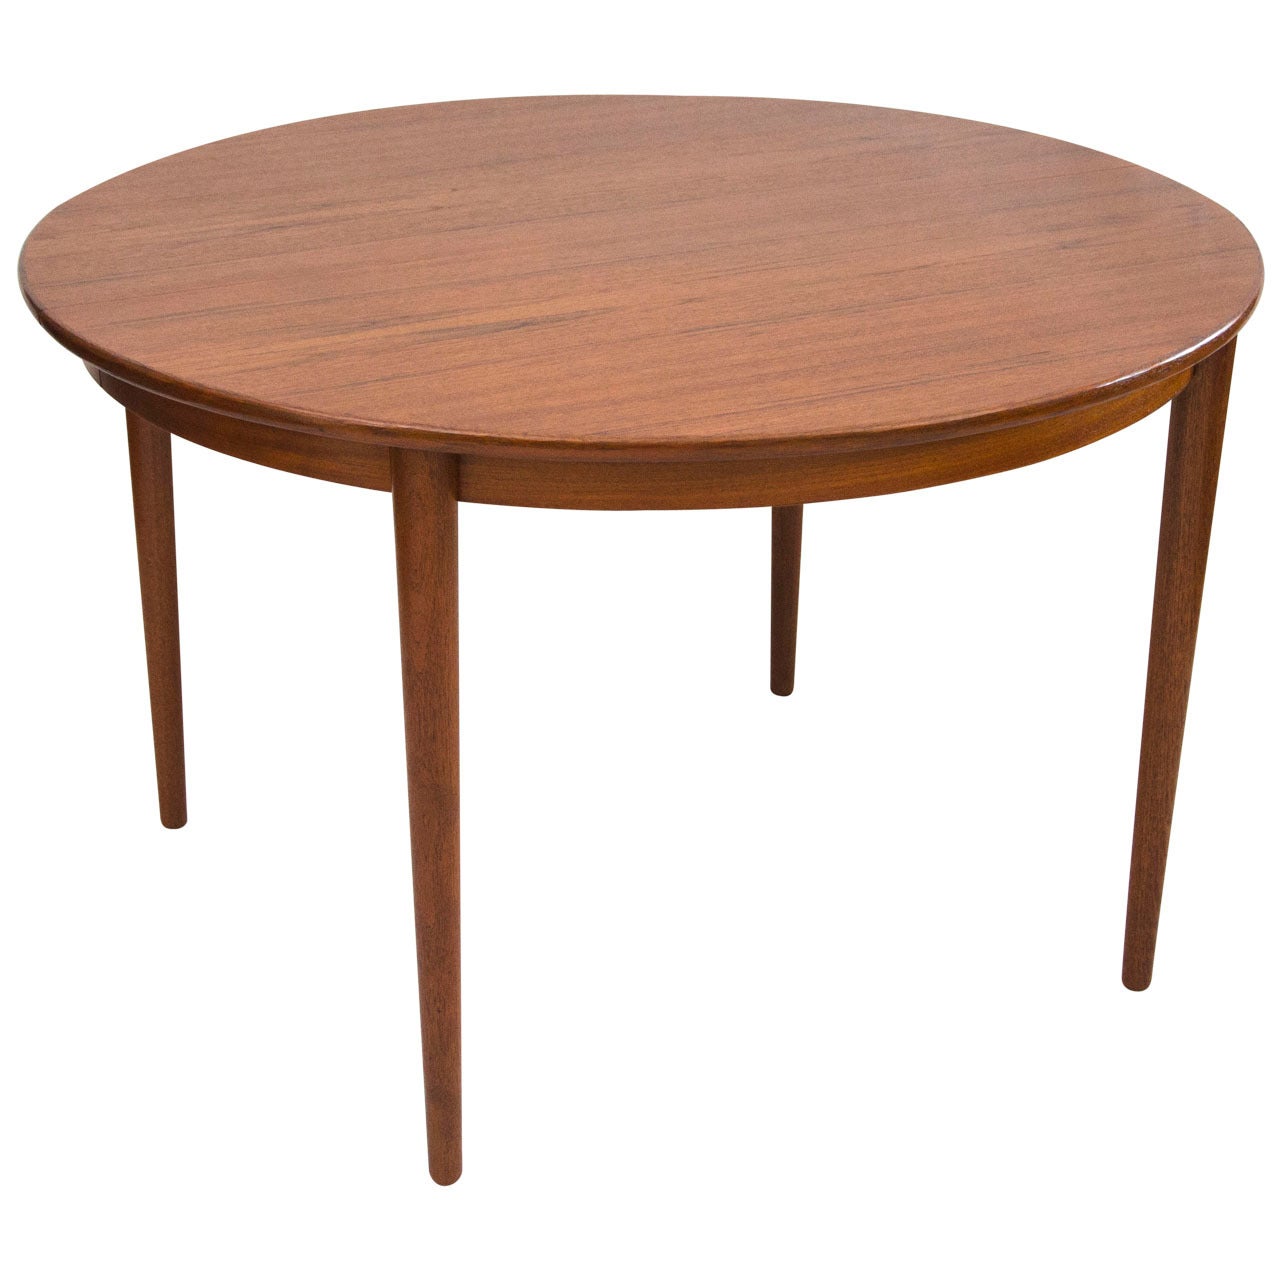 Danish Round Teak Dining Table with Two Leaves by Moreddi